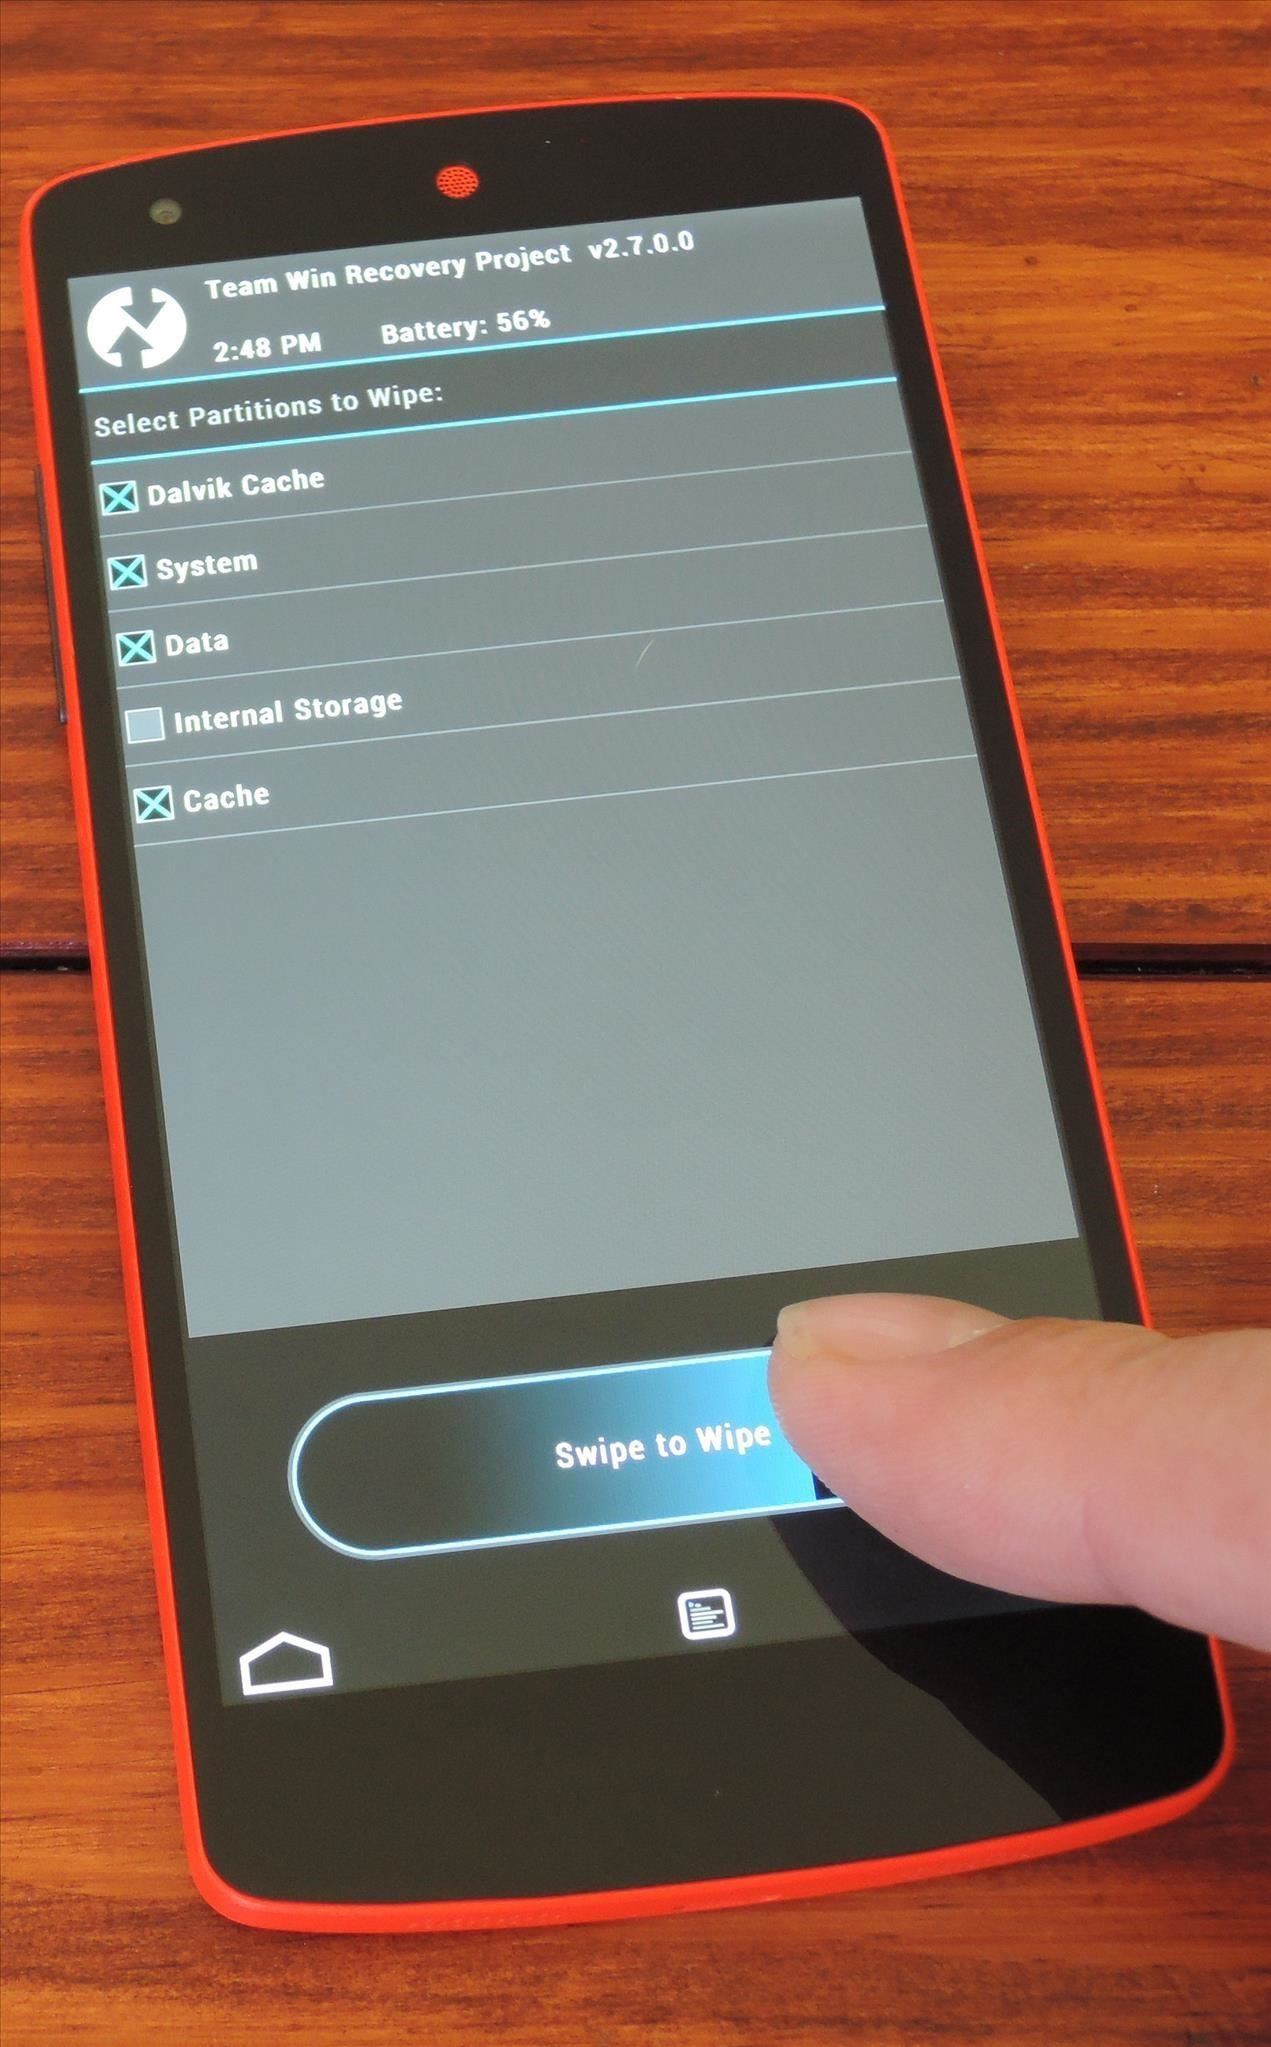 How to Get Sense 6 from the HTC One M8 on Your Nexus 5